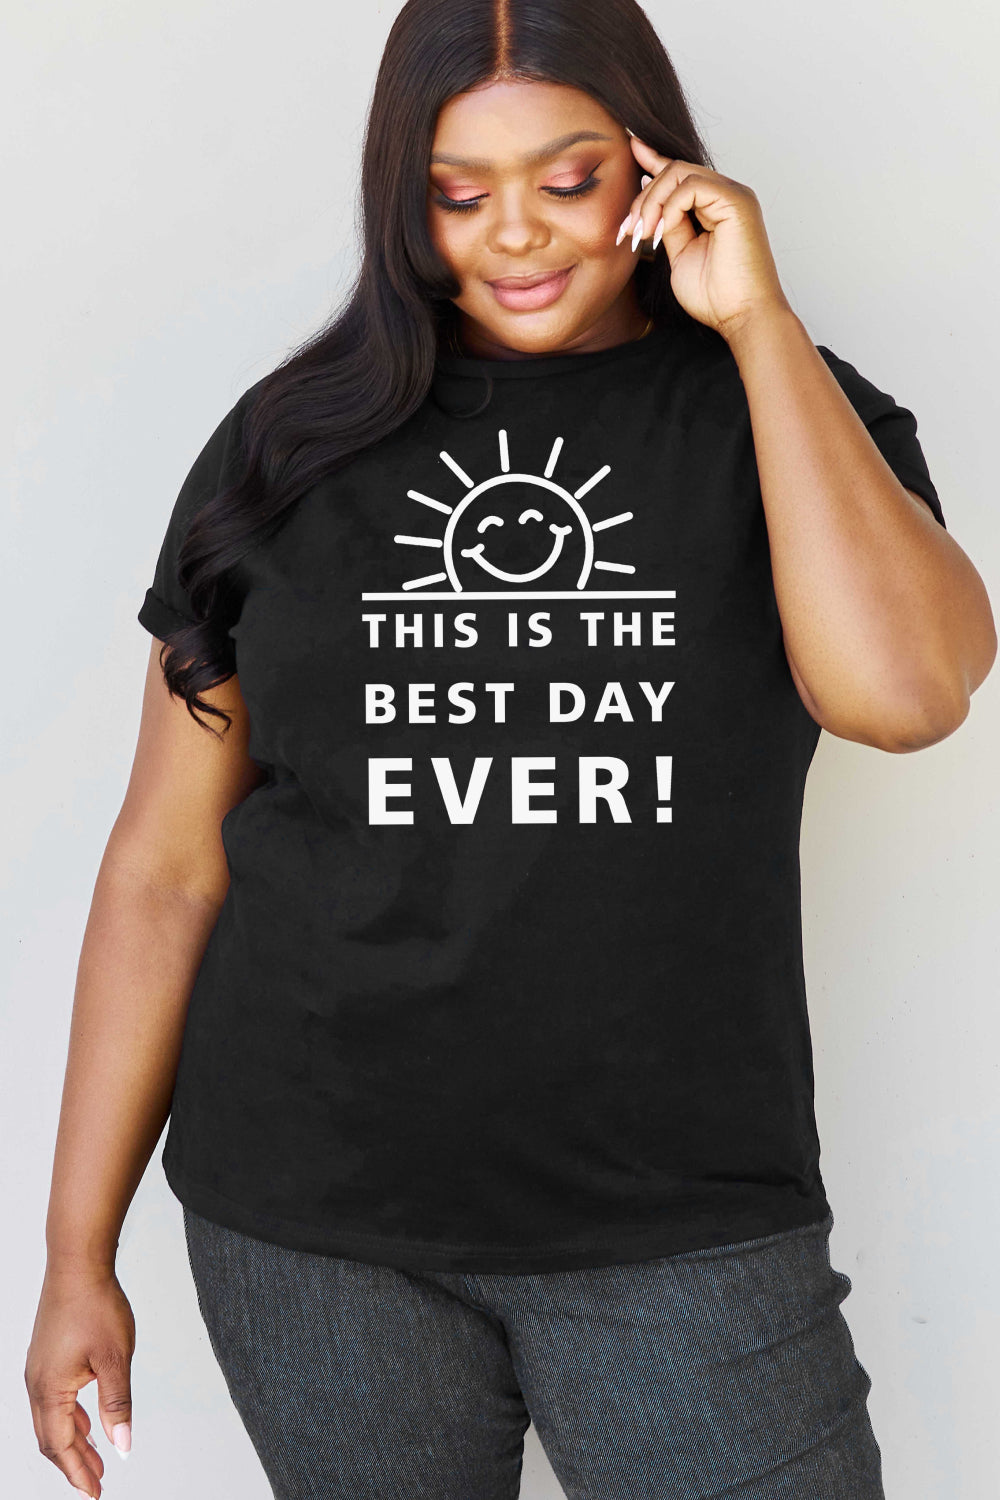 Simply Love Full Size THIS IS THE BEST DAY EVER! Graphic Cotton T-Shirt